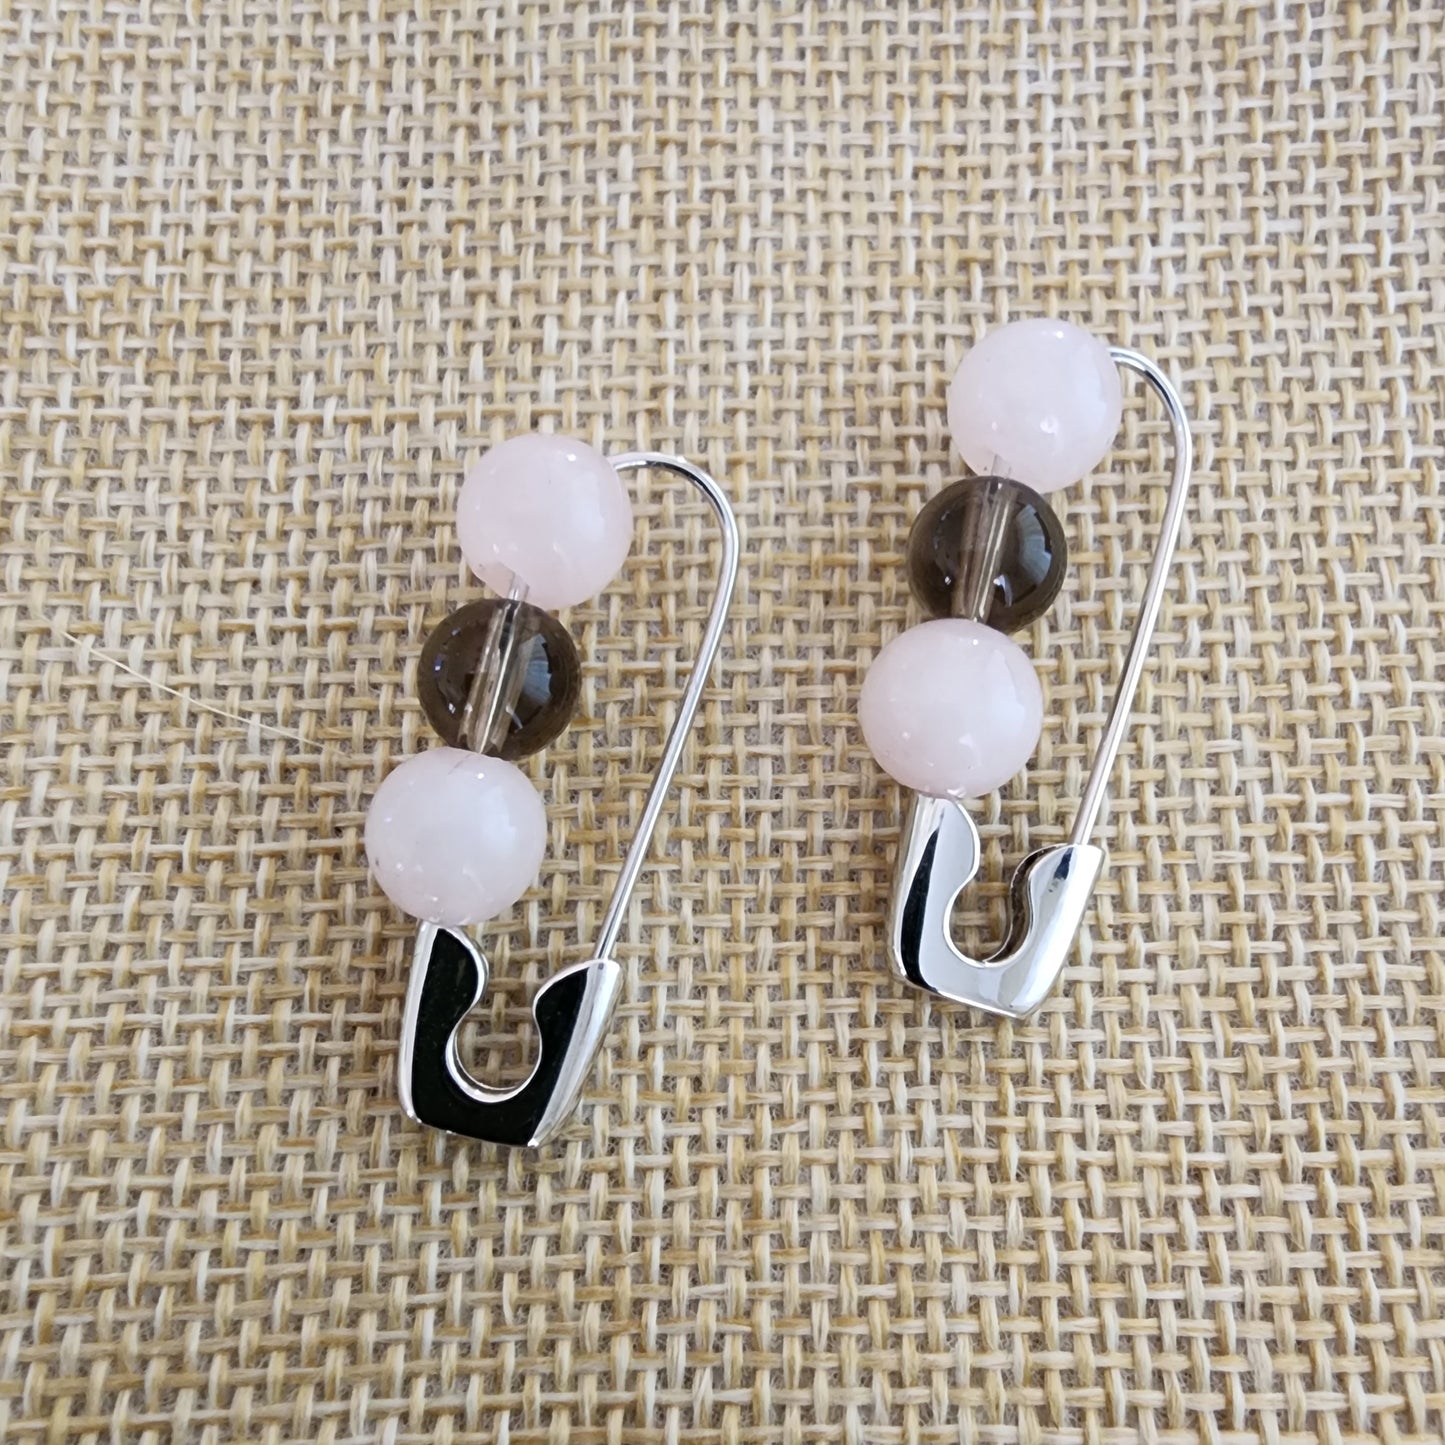 Safety Pin Crystal Earrings